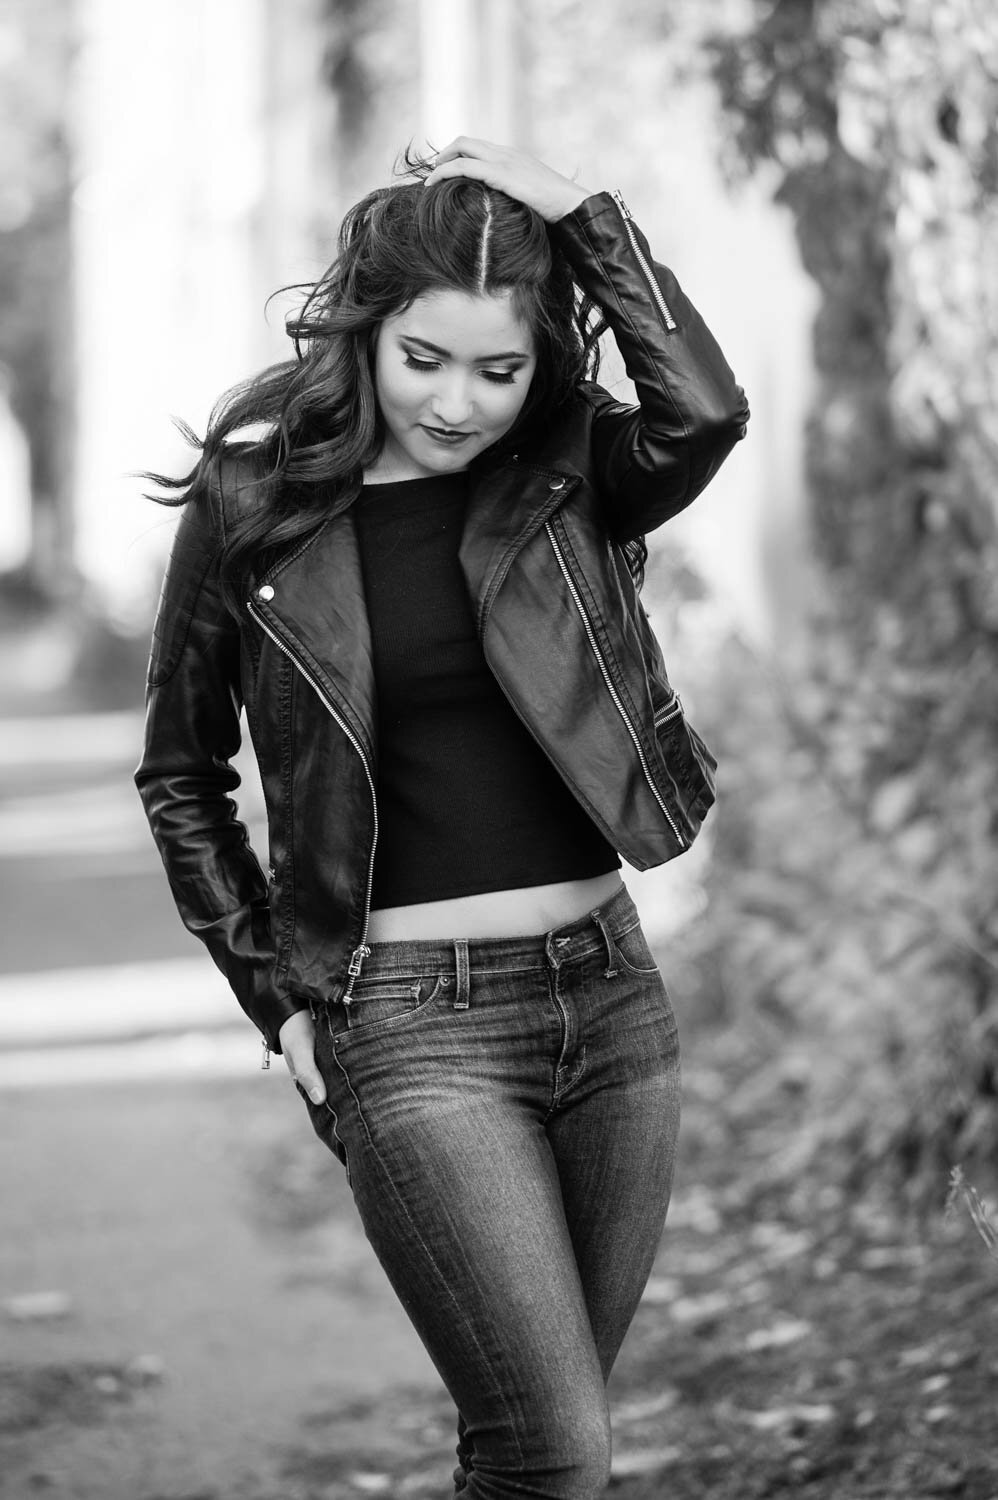 senior photo of girl wearing leather jacket and jeans in nature